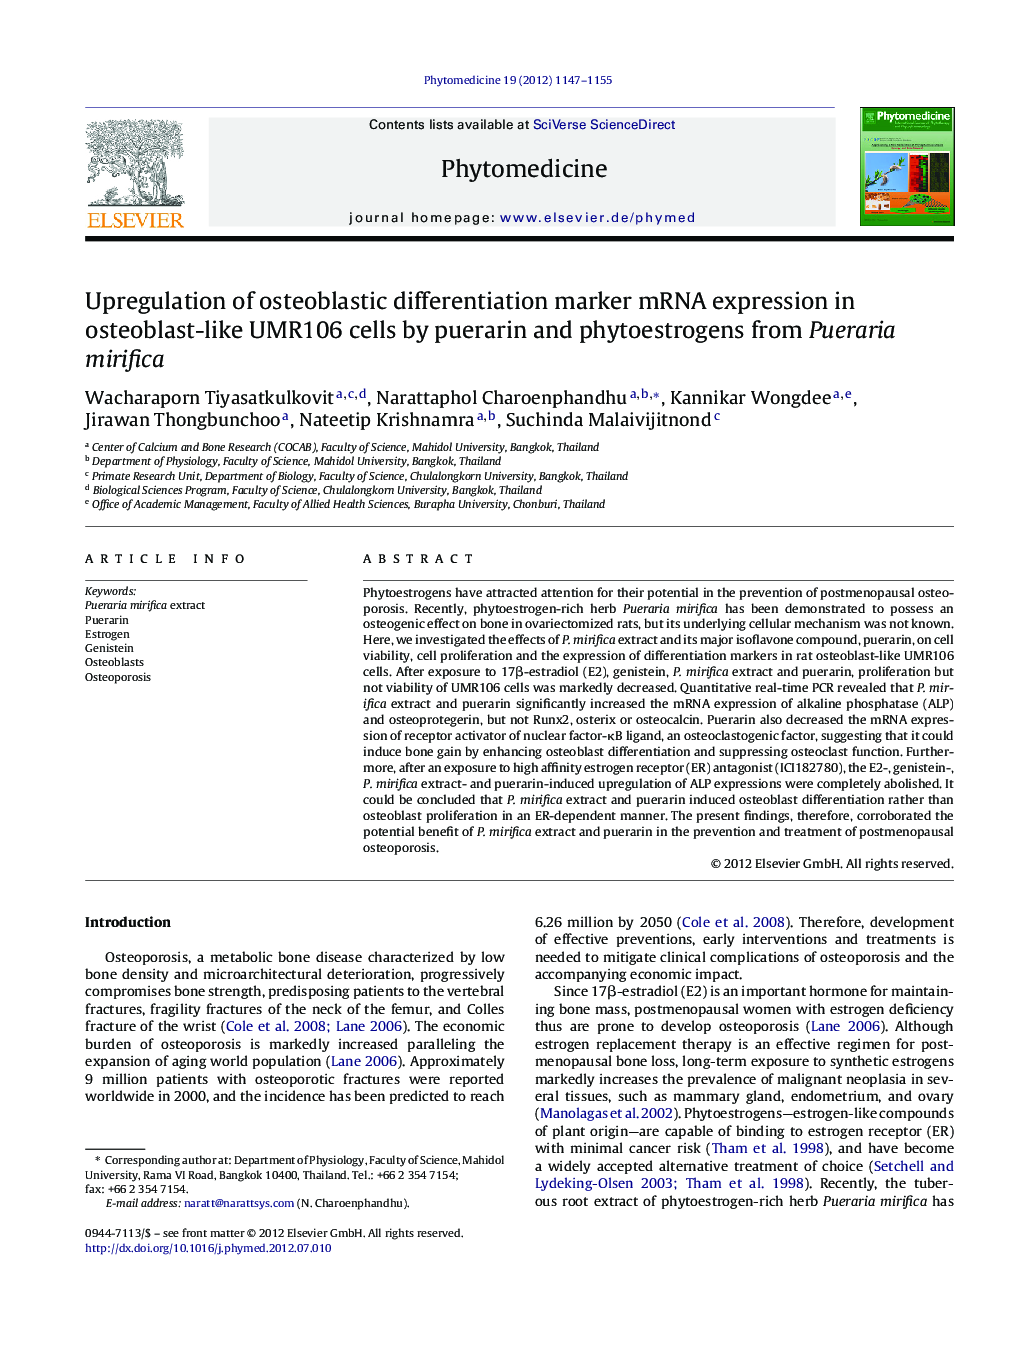 Upregulation of osteoblastic differentiation marker mRNA expression in osteoblast-like UMR106 cells by puerarin and phytoestrogens from Pueraria mirifica